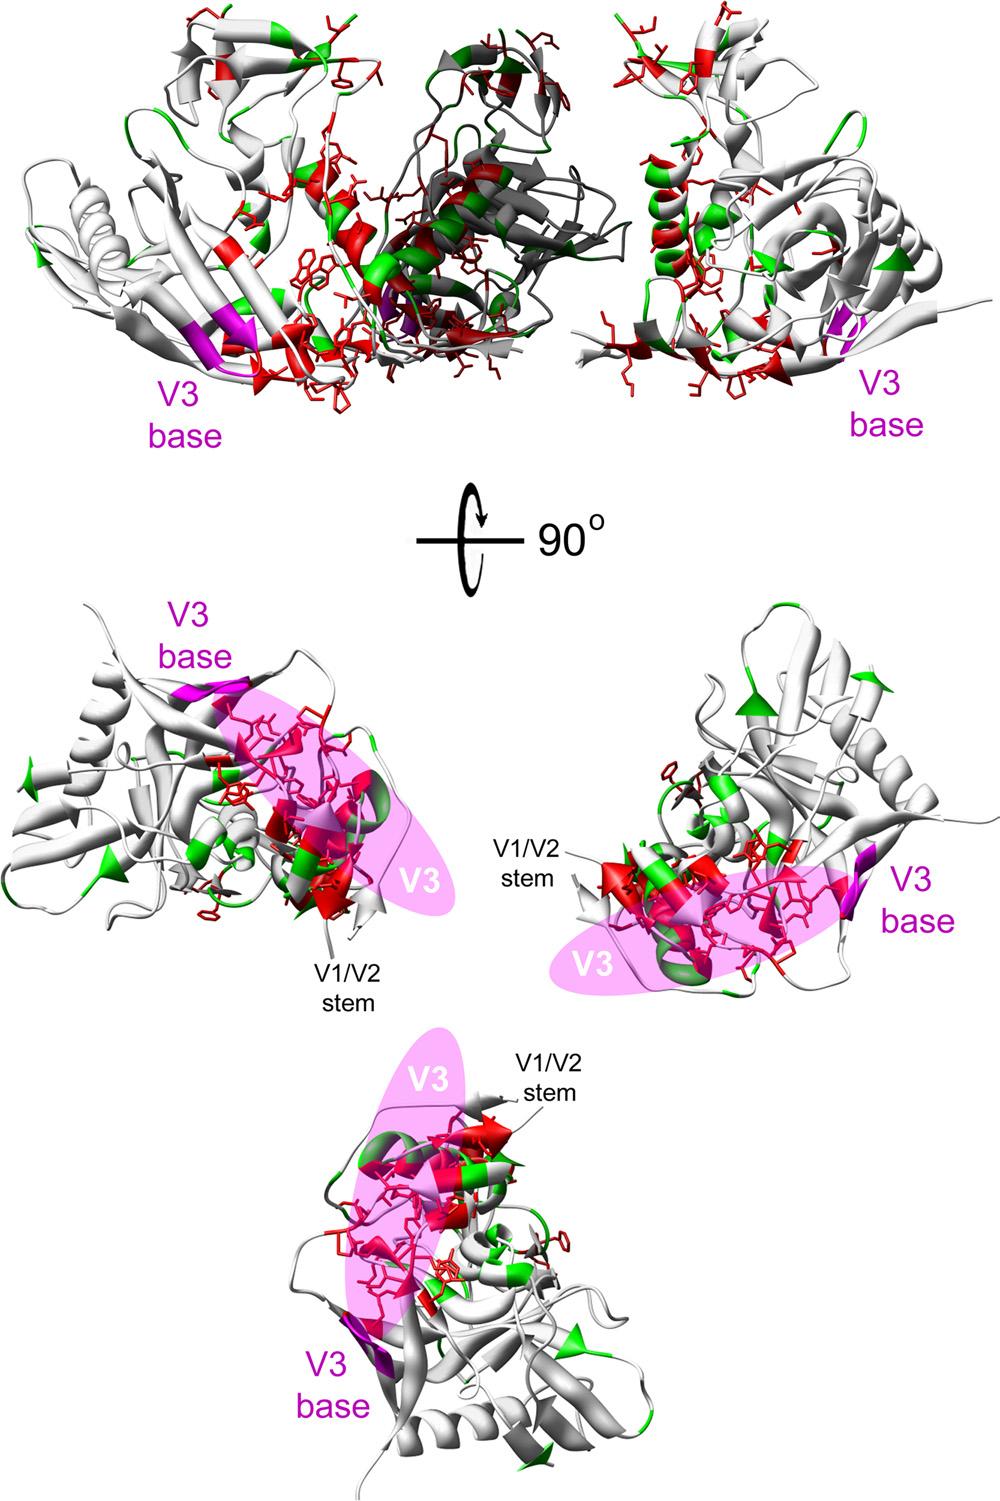 VOL. 84, 2010 HIV-1 gp120 V3 LOOP REGULATES TRIMER STABILITY 3159 FIG. 10. Model of the conformational changes in the HIV-1 envelope glycoprotein induced by CD4 binding.